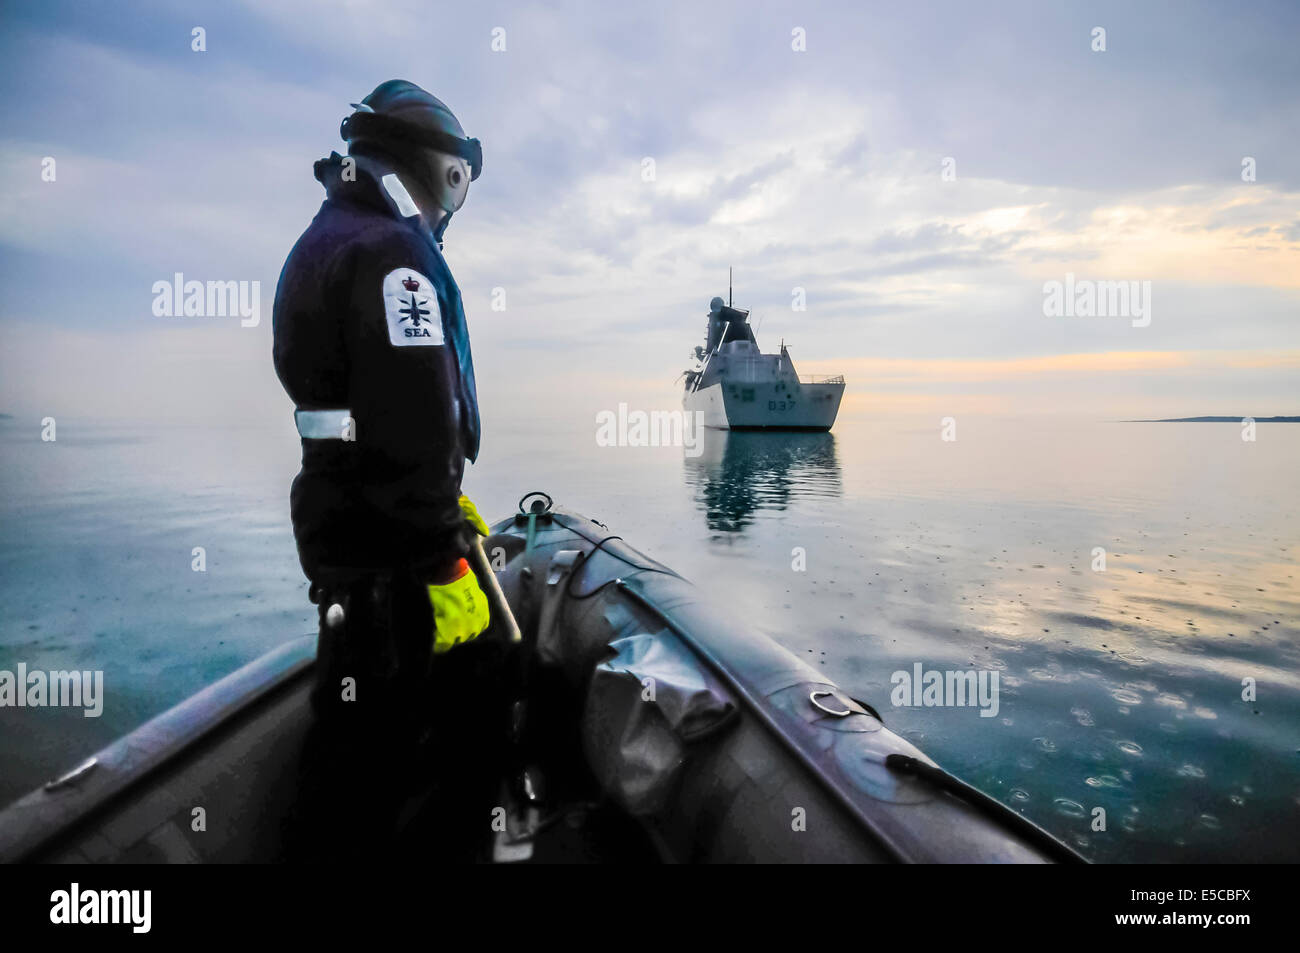 Belfast, Northern Ireland. 26/07/2014 - A Royal Navy sailor stands at the prow of a Pacific 28 RIB as it approaches HMS Duncan. Stock Photo